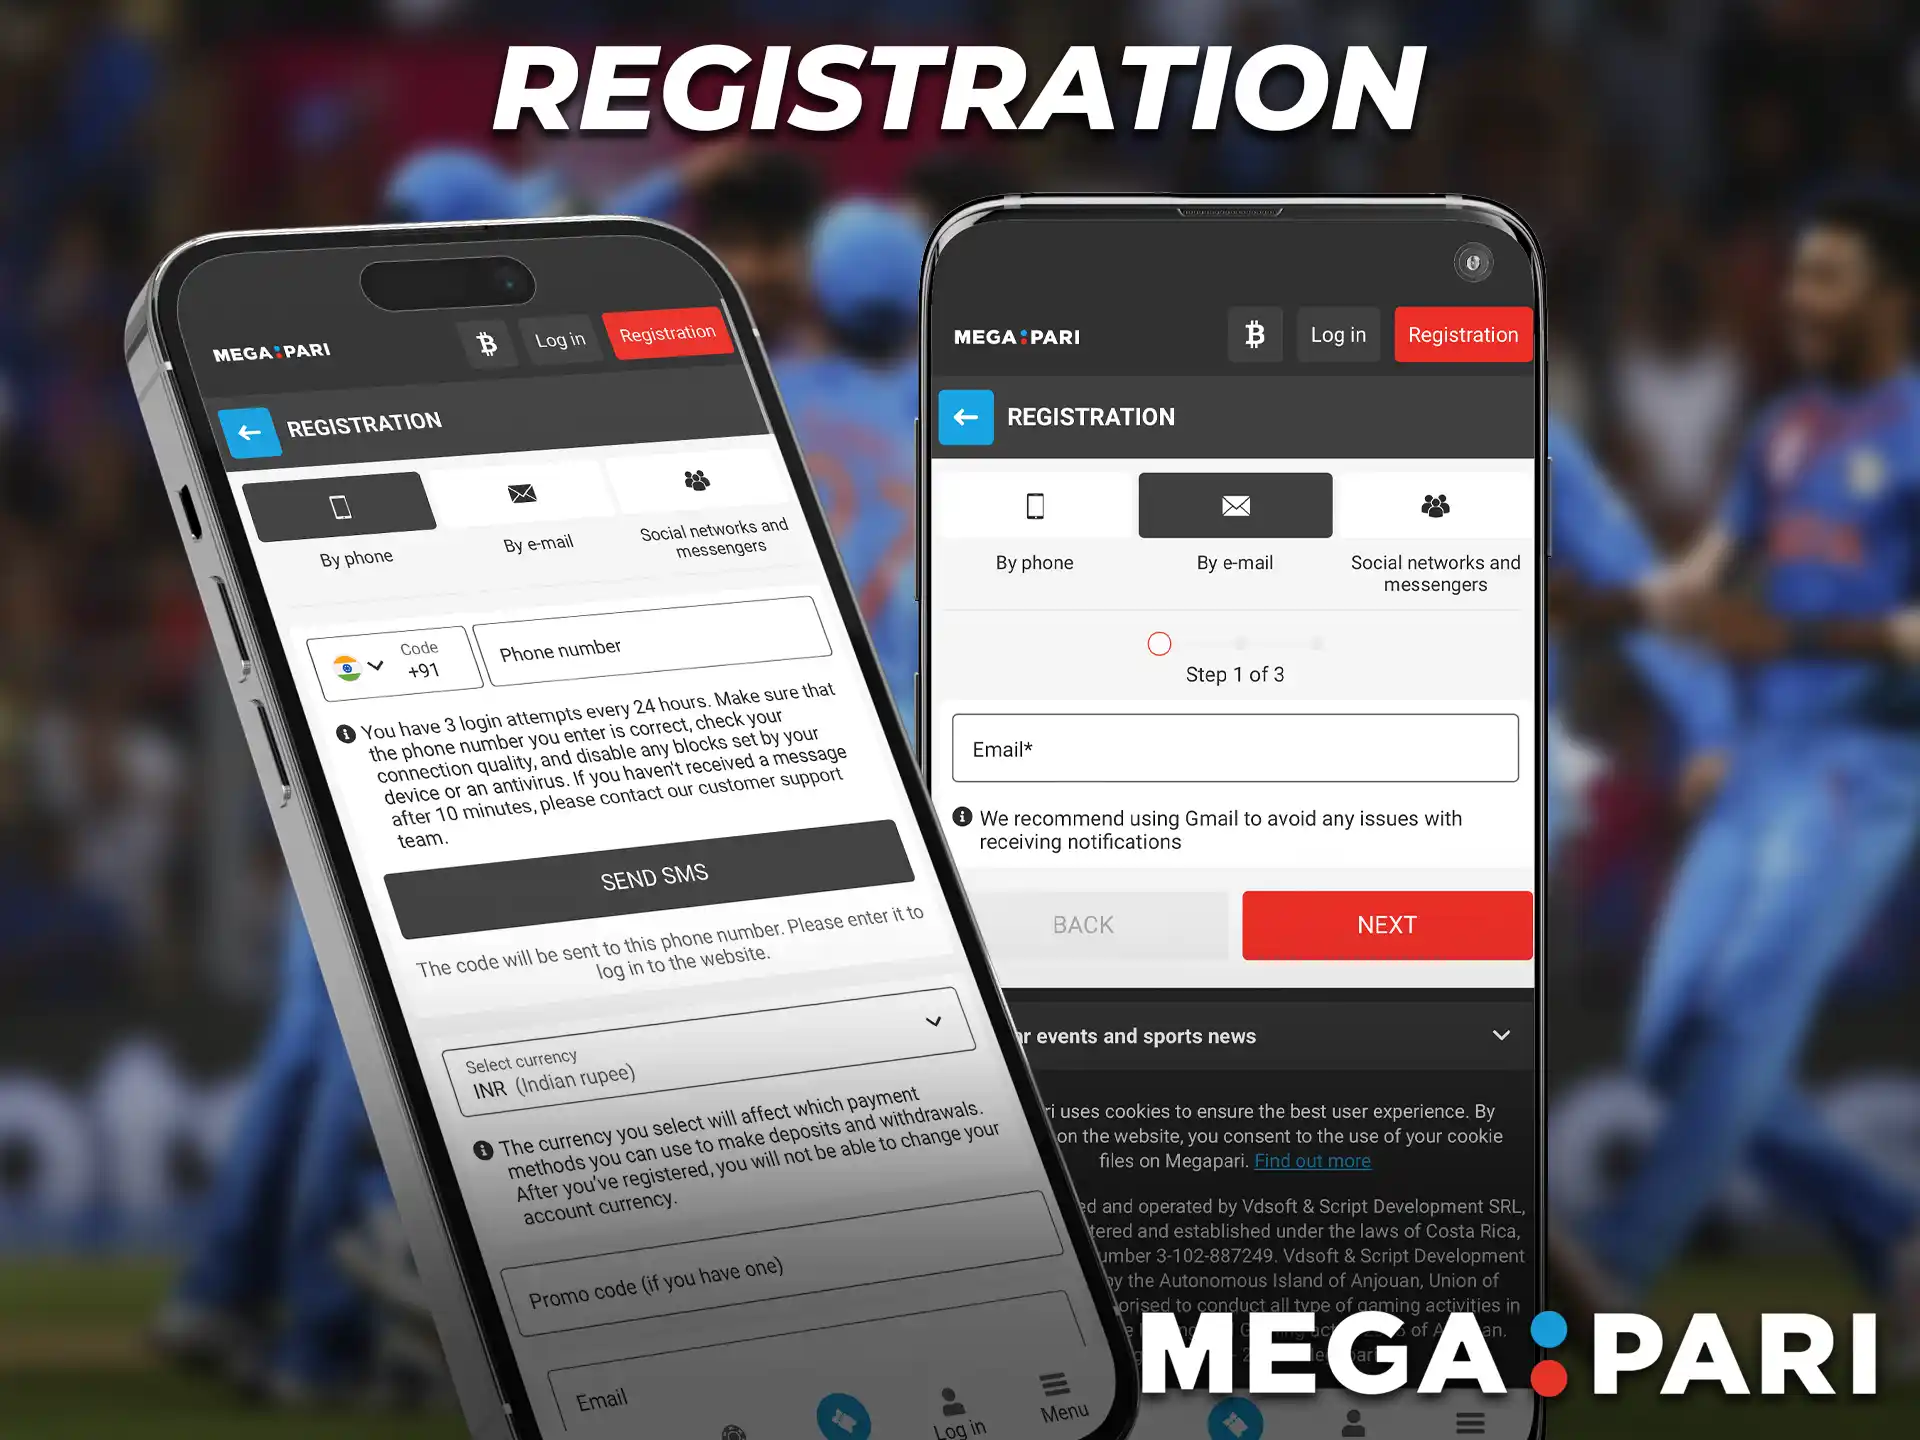 Open the app and fill out the registration form to start betting at Megapari.